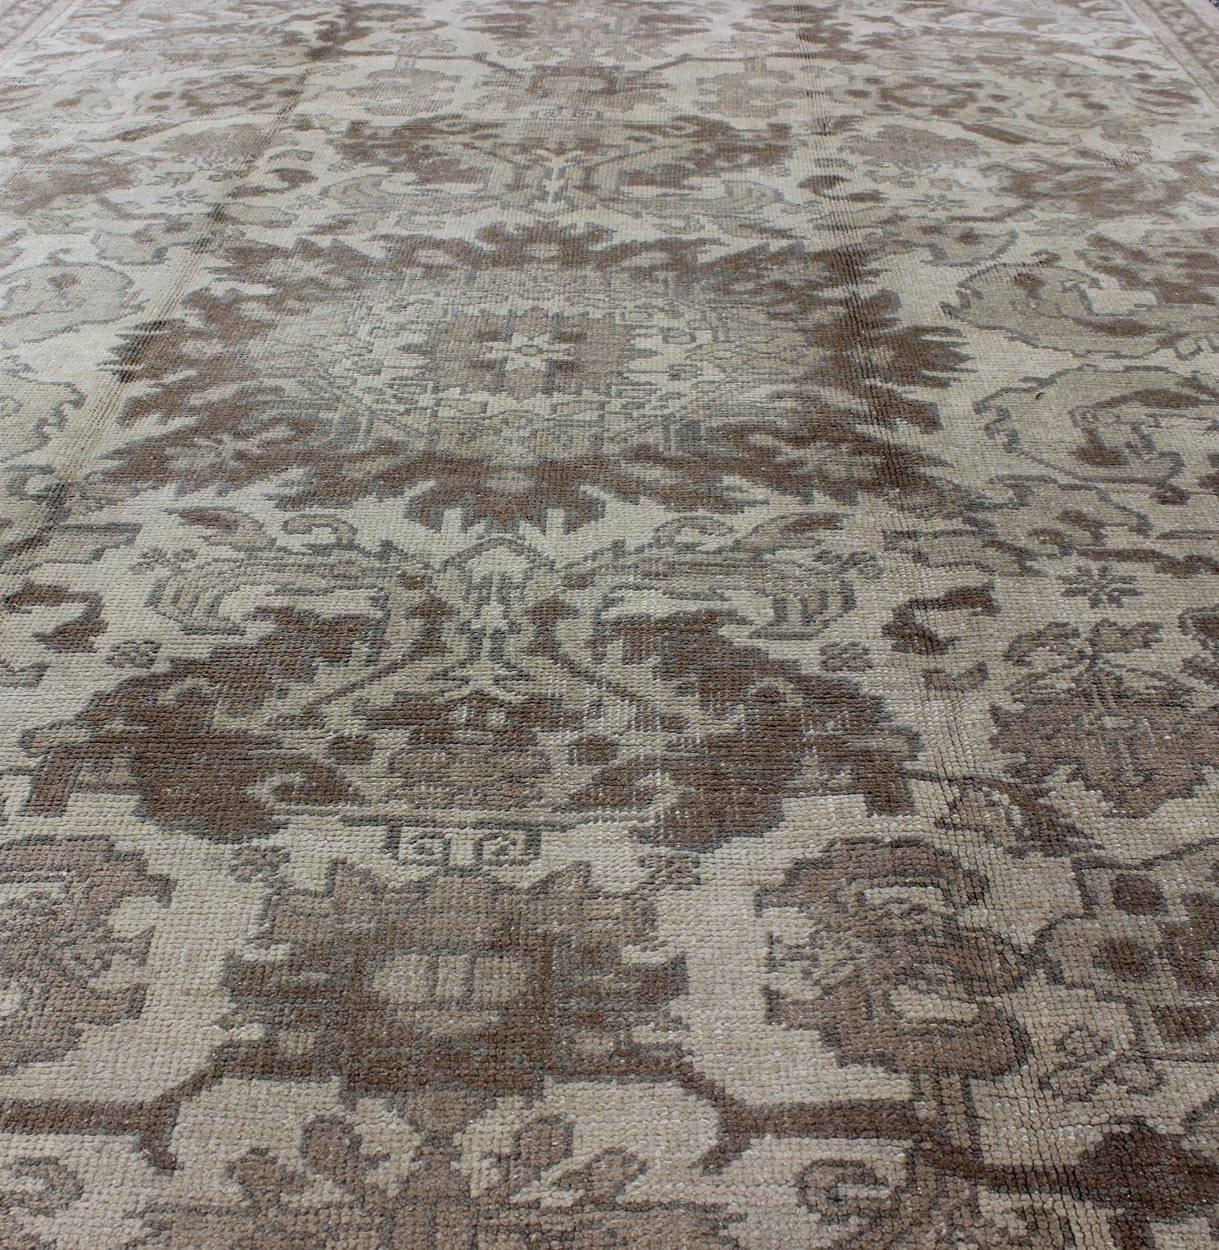 Wool Earth Tone Vintage Turkish Oushak Rug with All-Over Floral Design For Sale